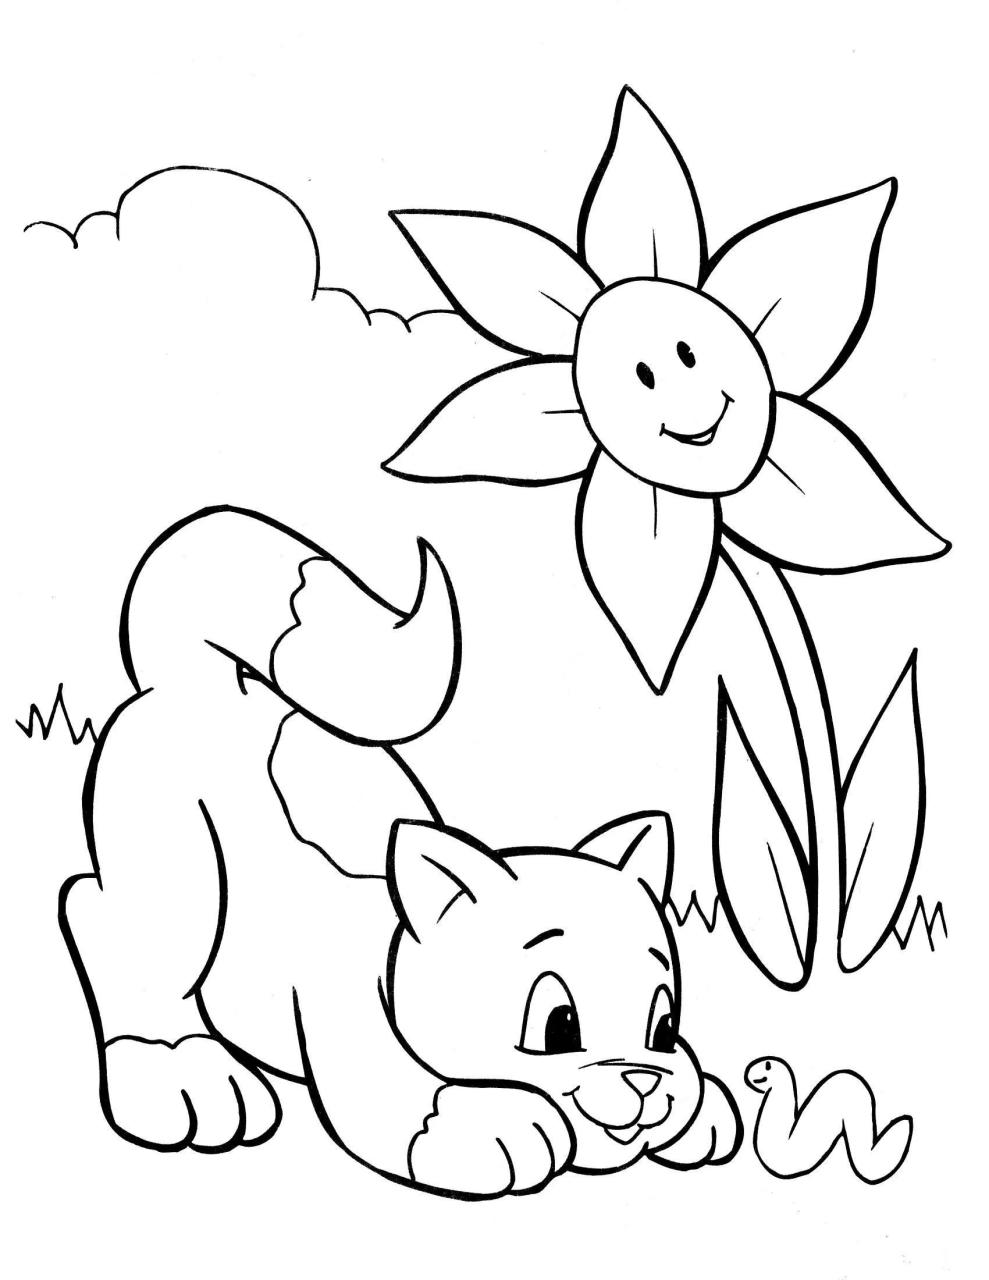 List Of Dinosaur Coloring Pages Pdf 2022